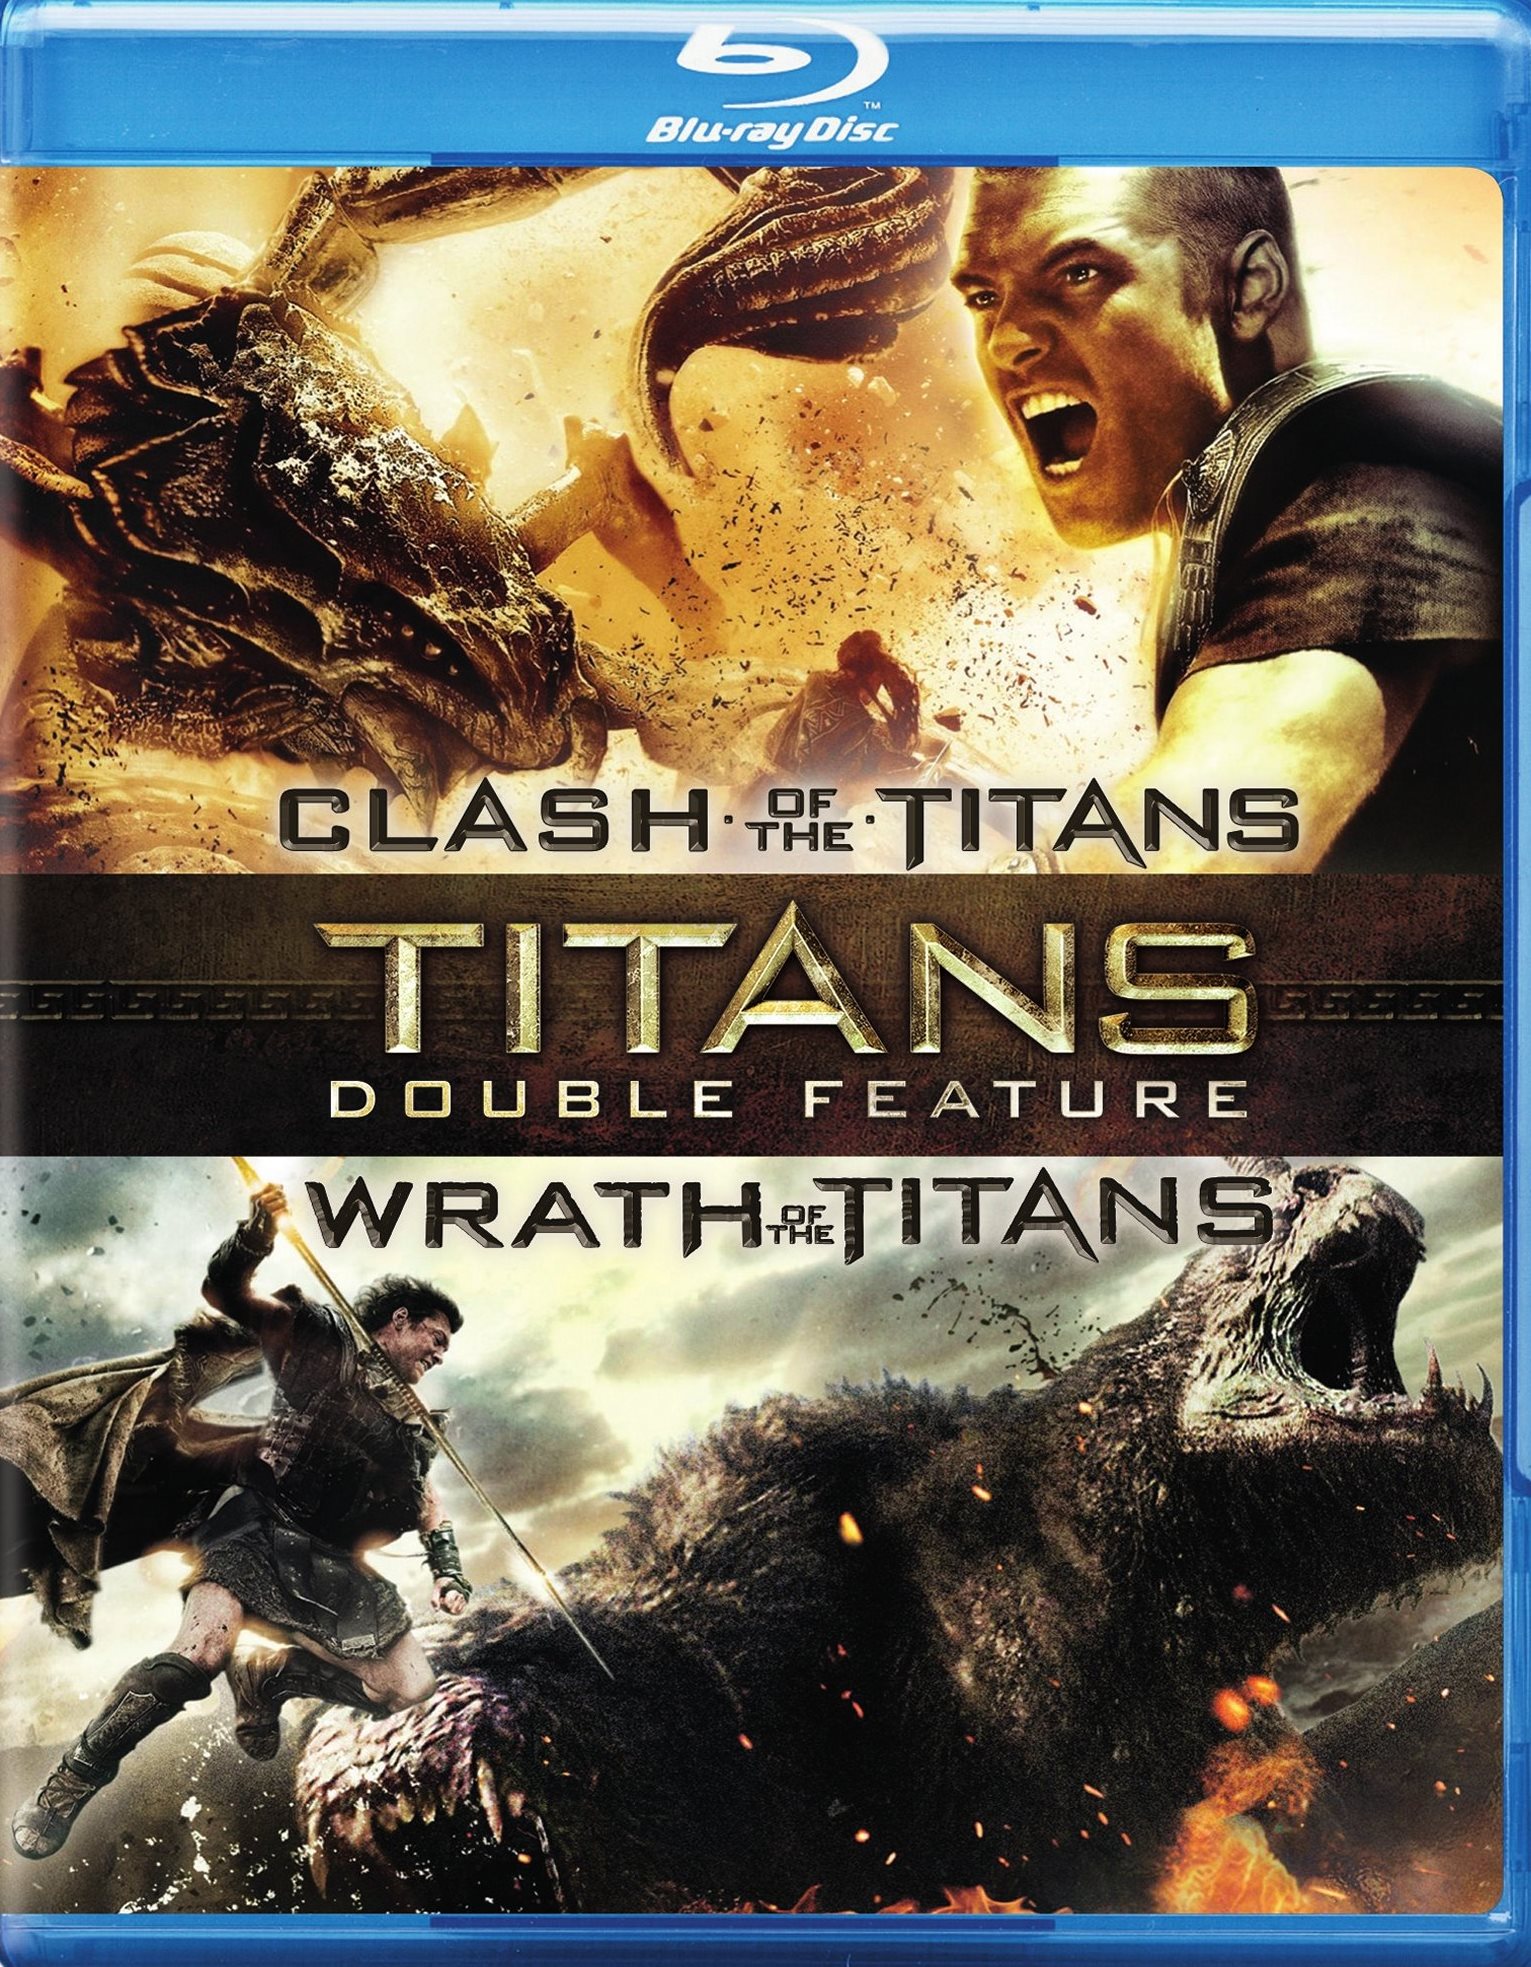 Movie Review - 'Clash of the Titans' - Back In The Day, When